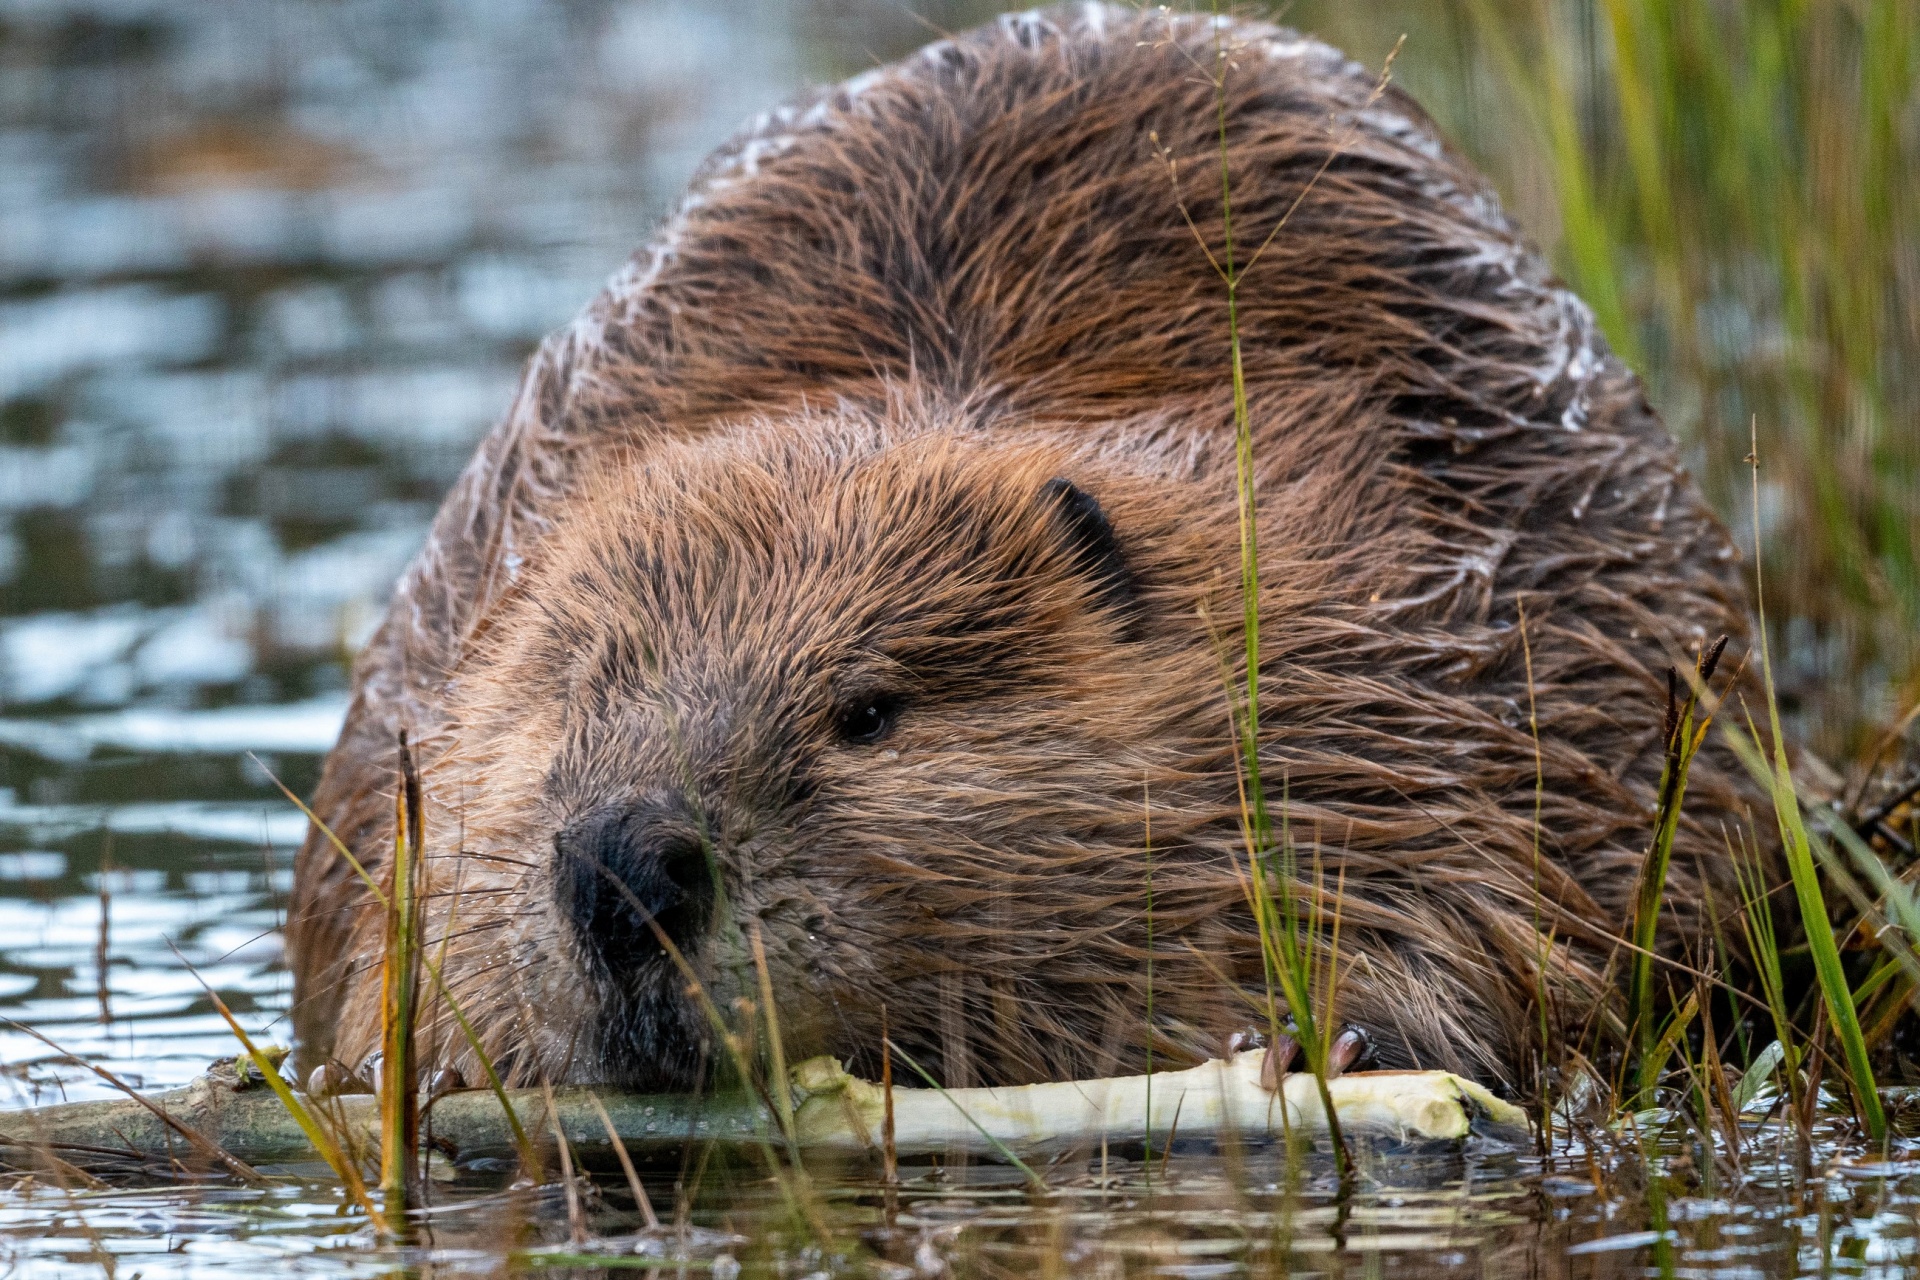 A beaver partially submerged in a pond